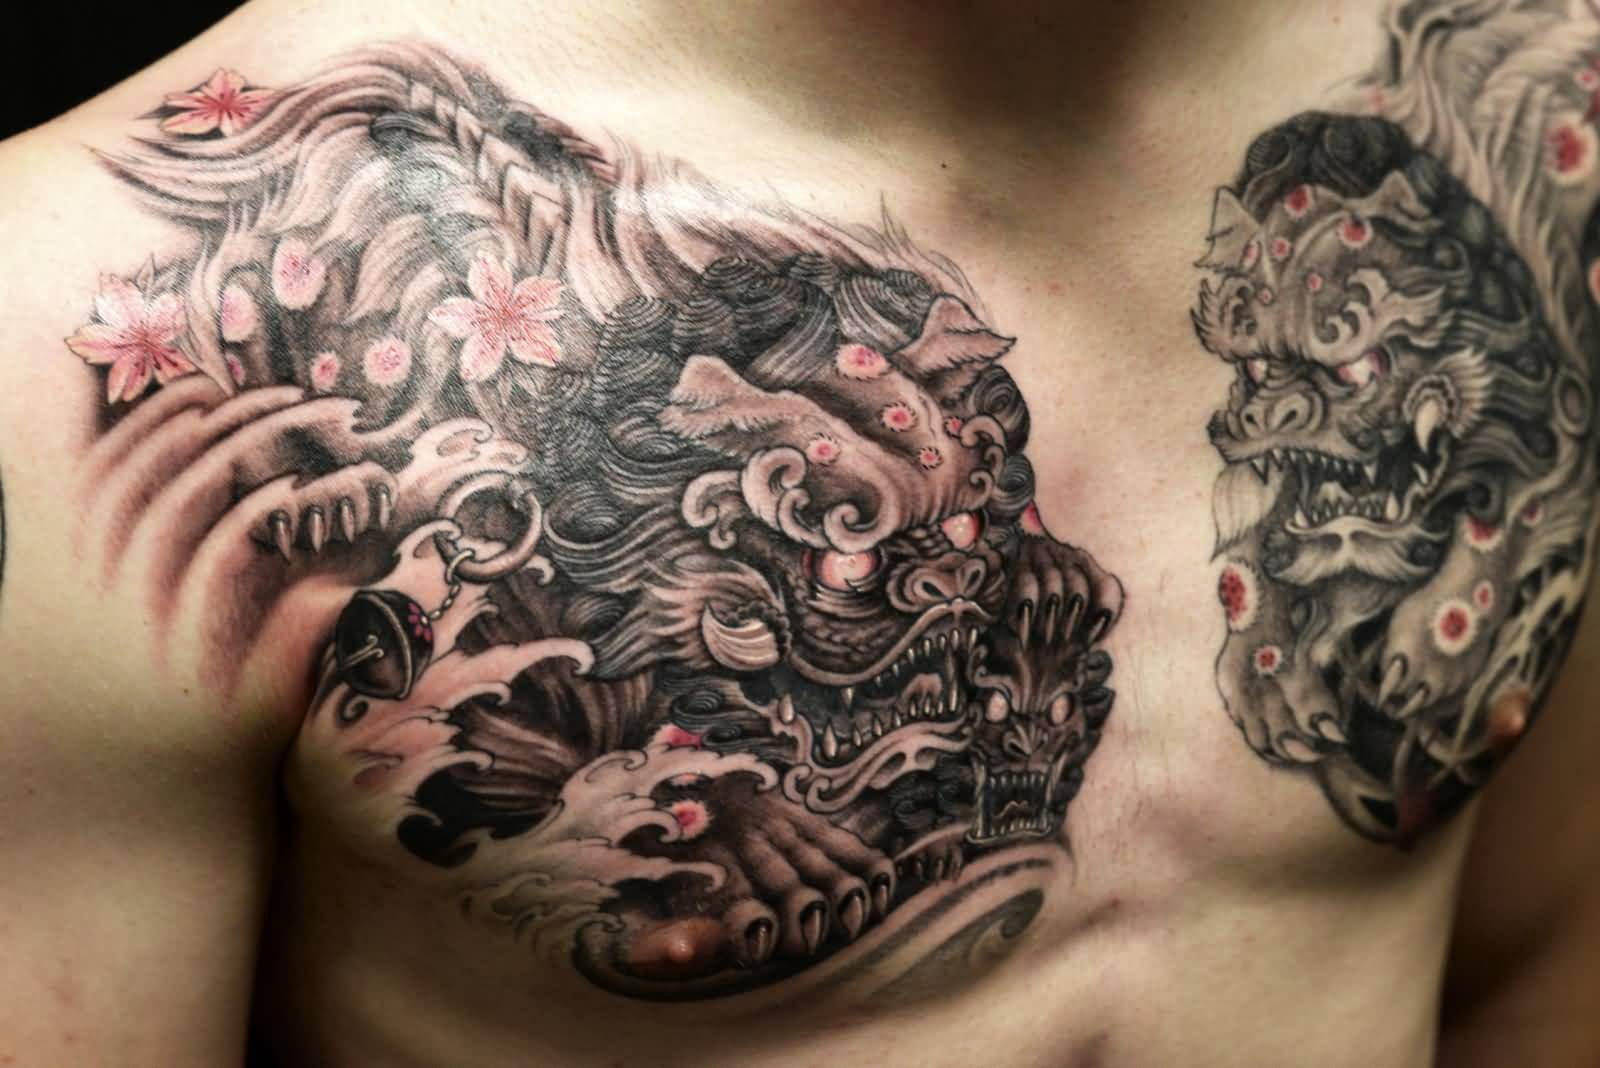 The 100 Best Chest Tattoos For Men Improb in size 1600 X 1068